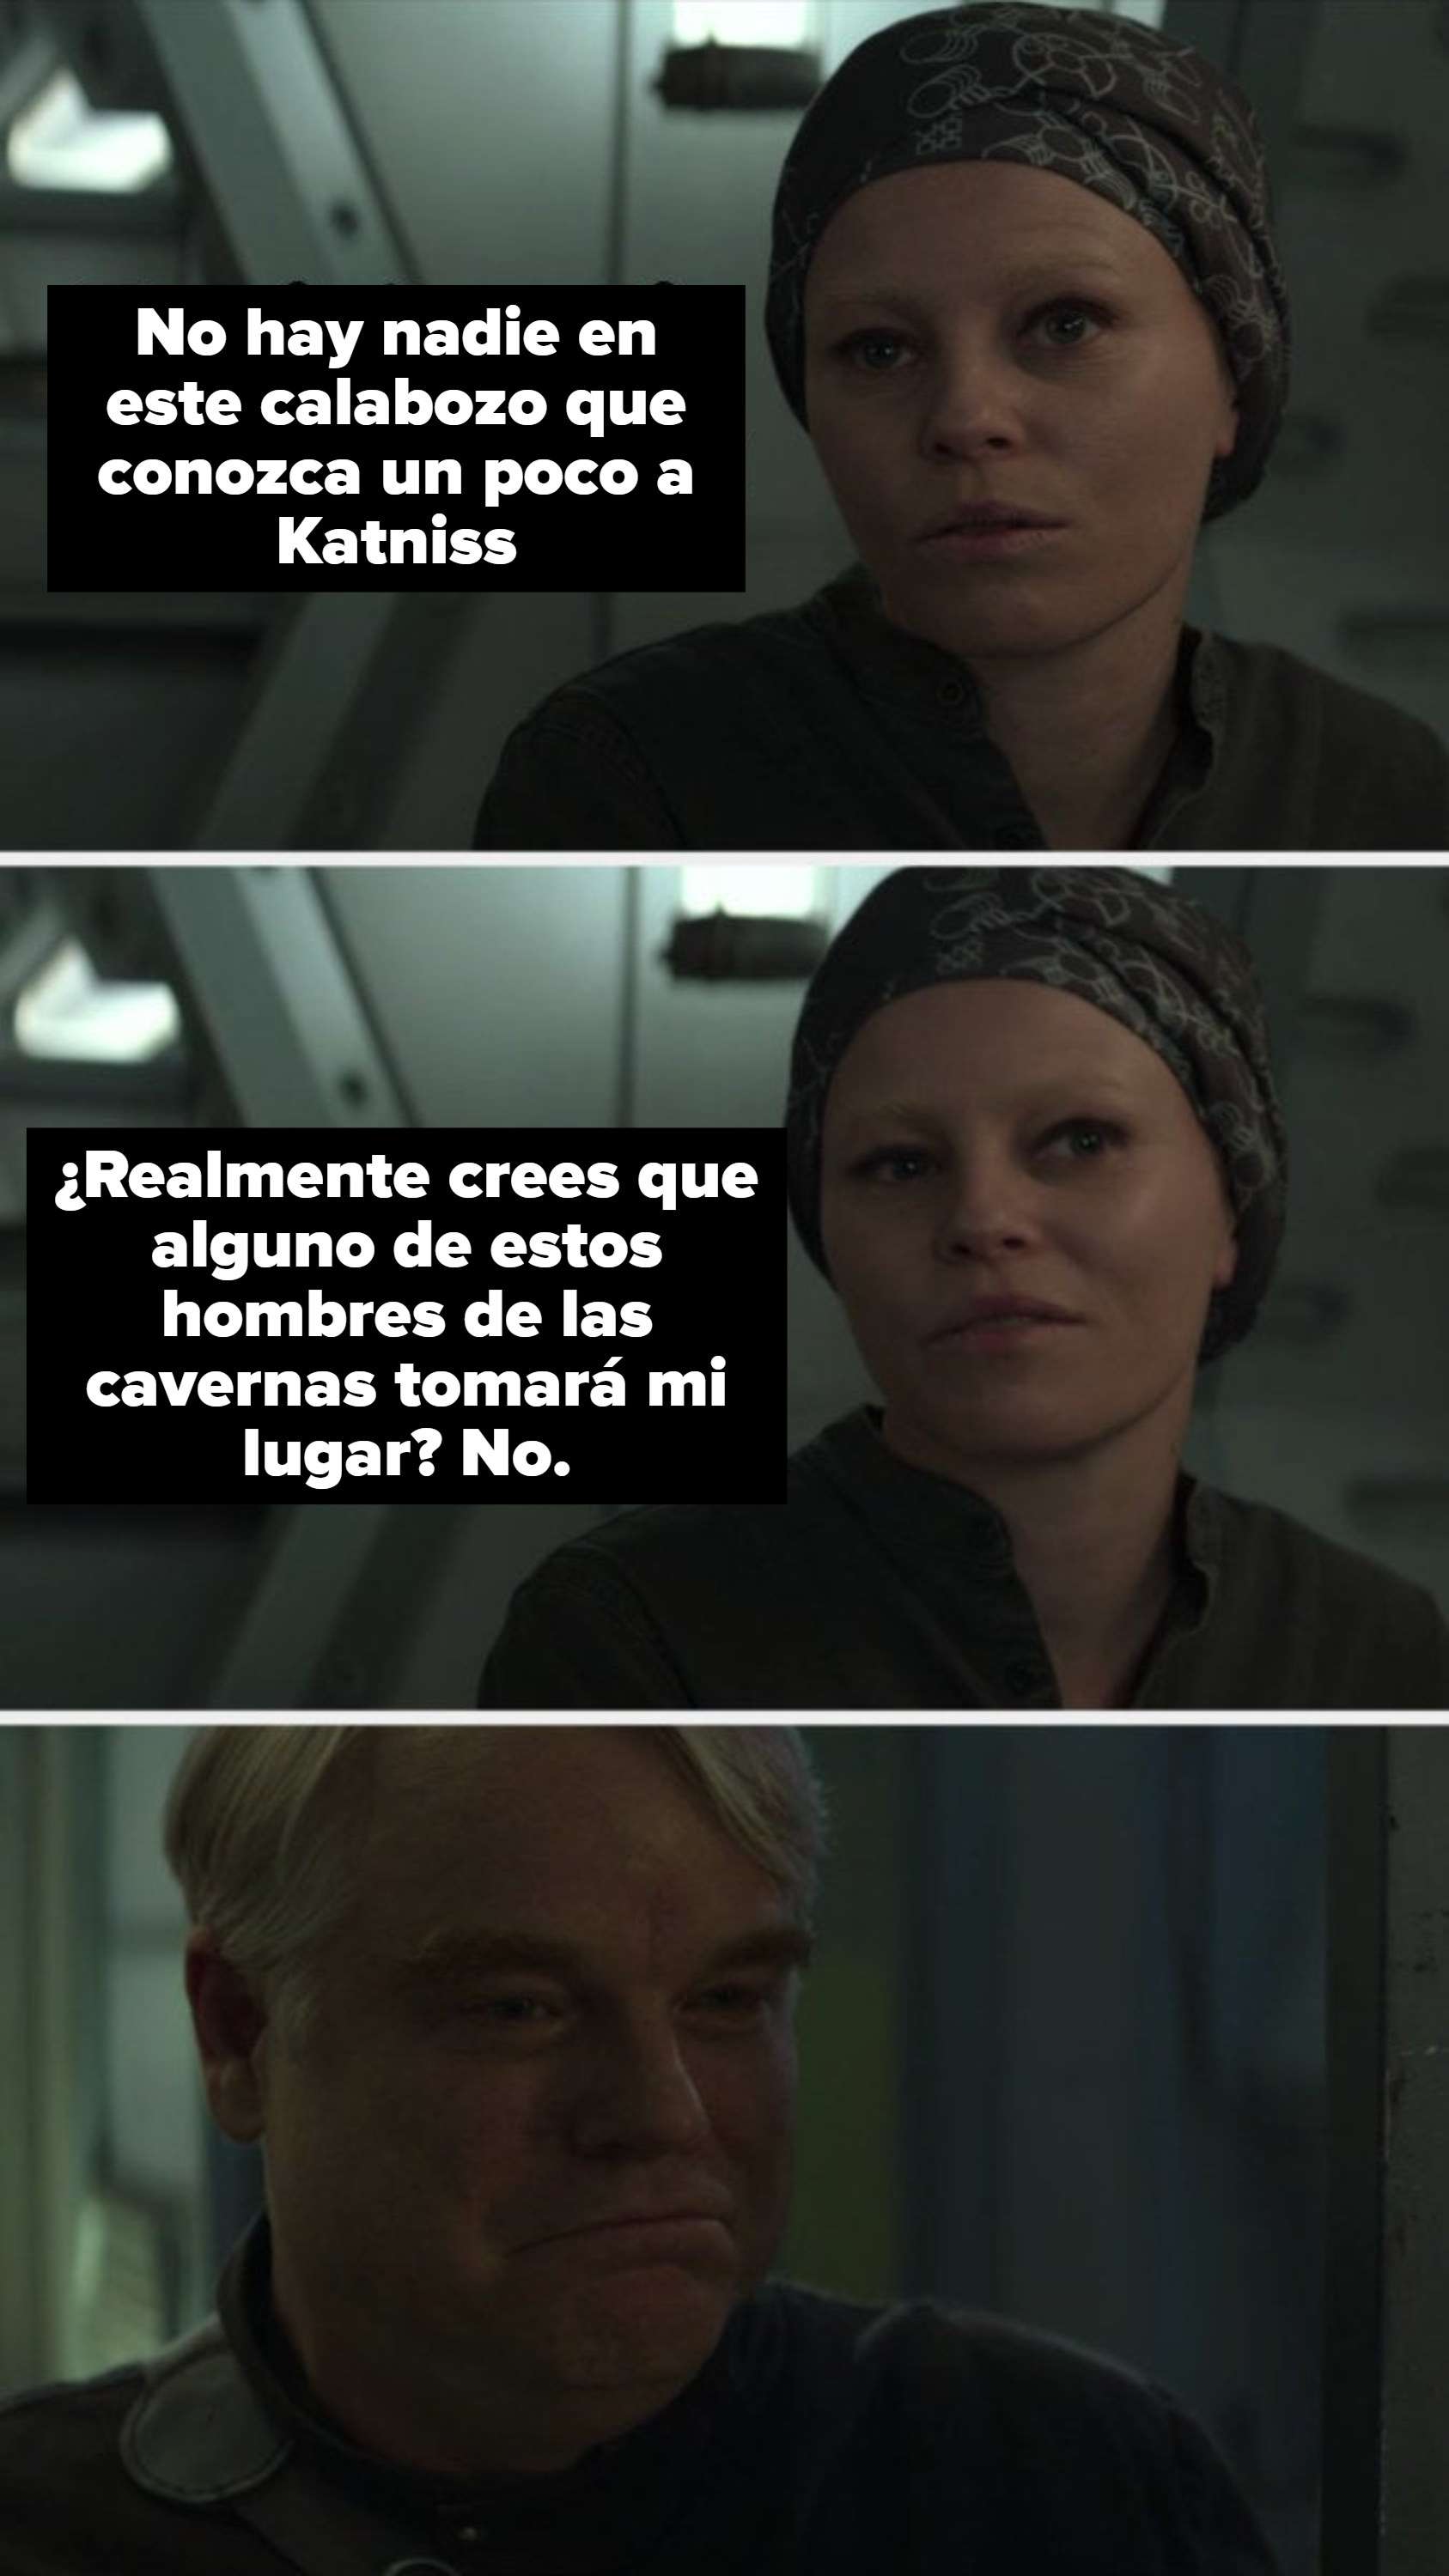 Effie tells Plutarch no one knows Katniss like she does